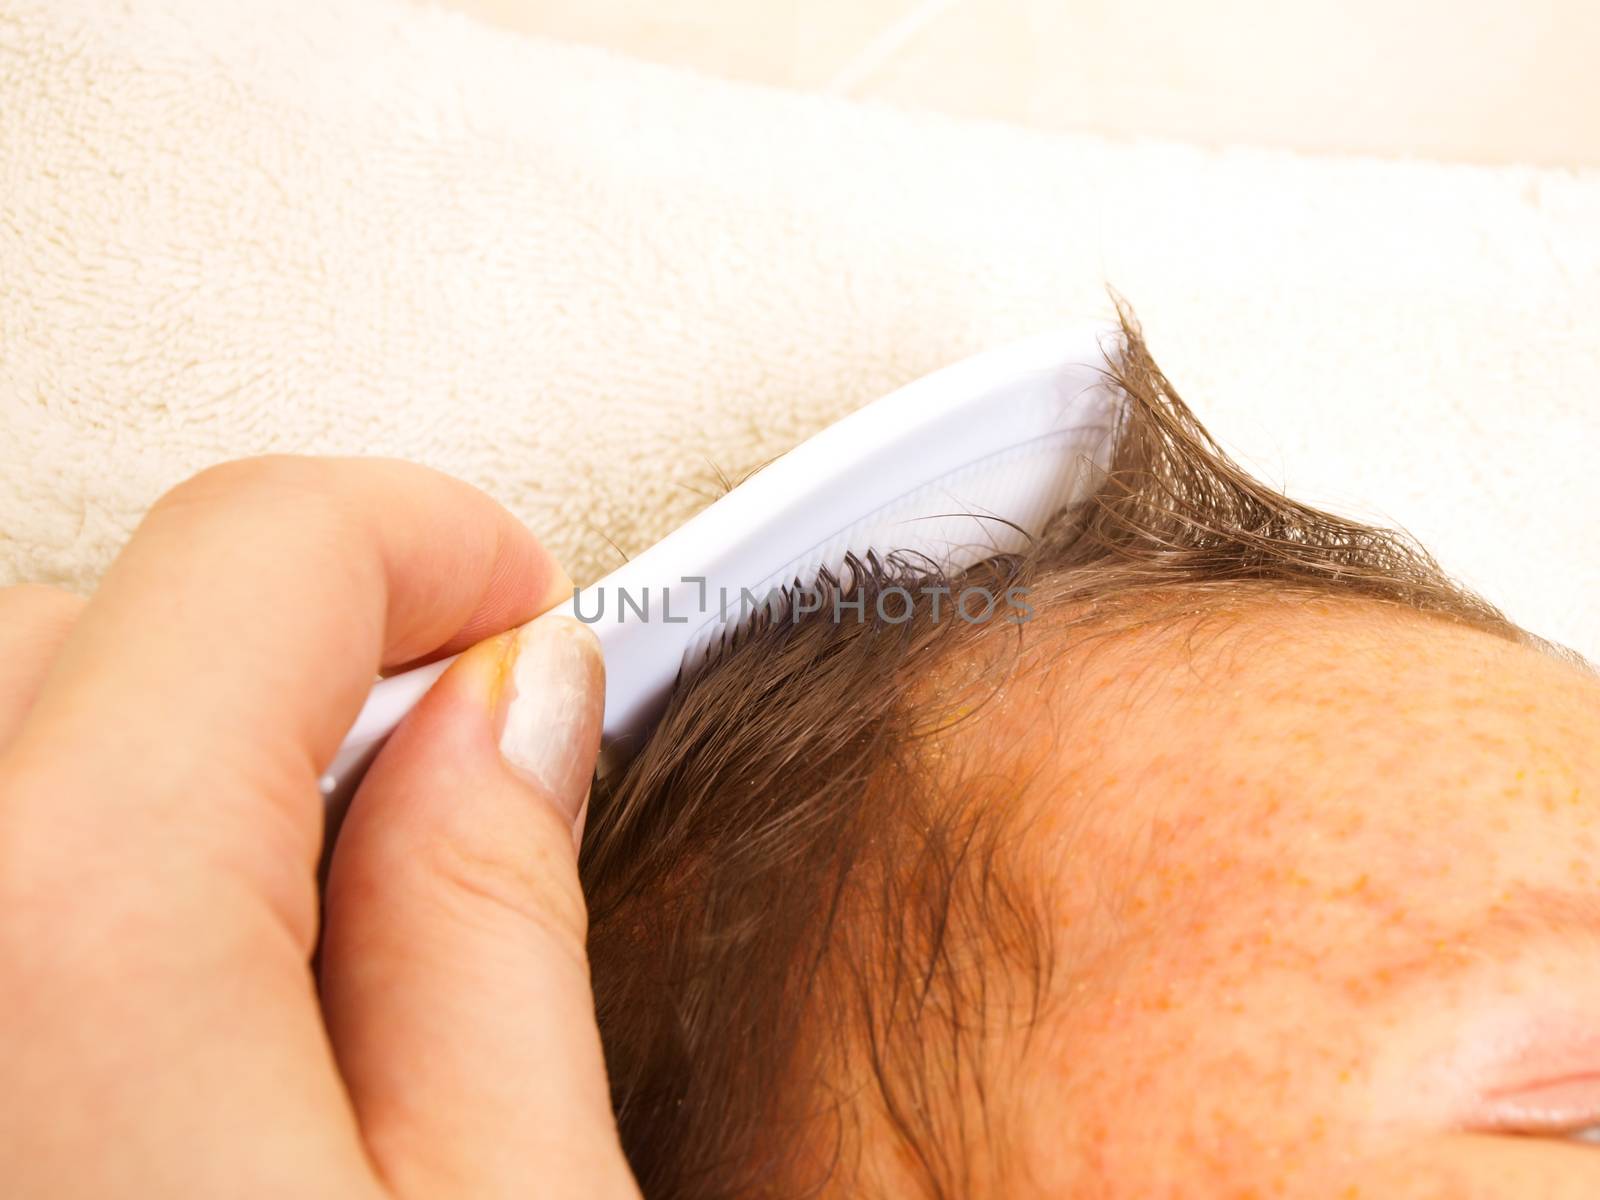 Female with manicure on thumbnail combing hair of a baby